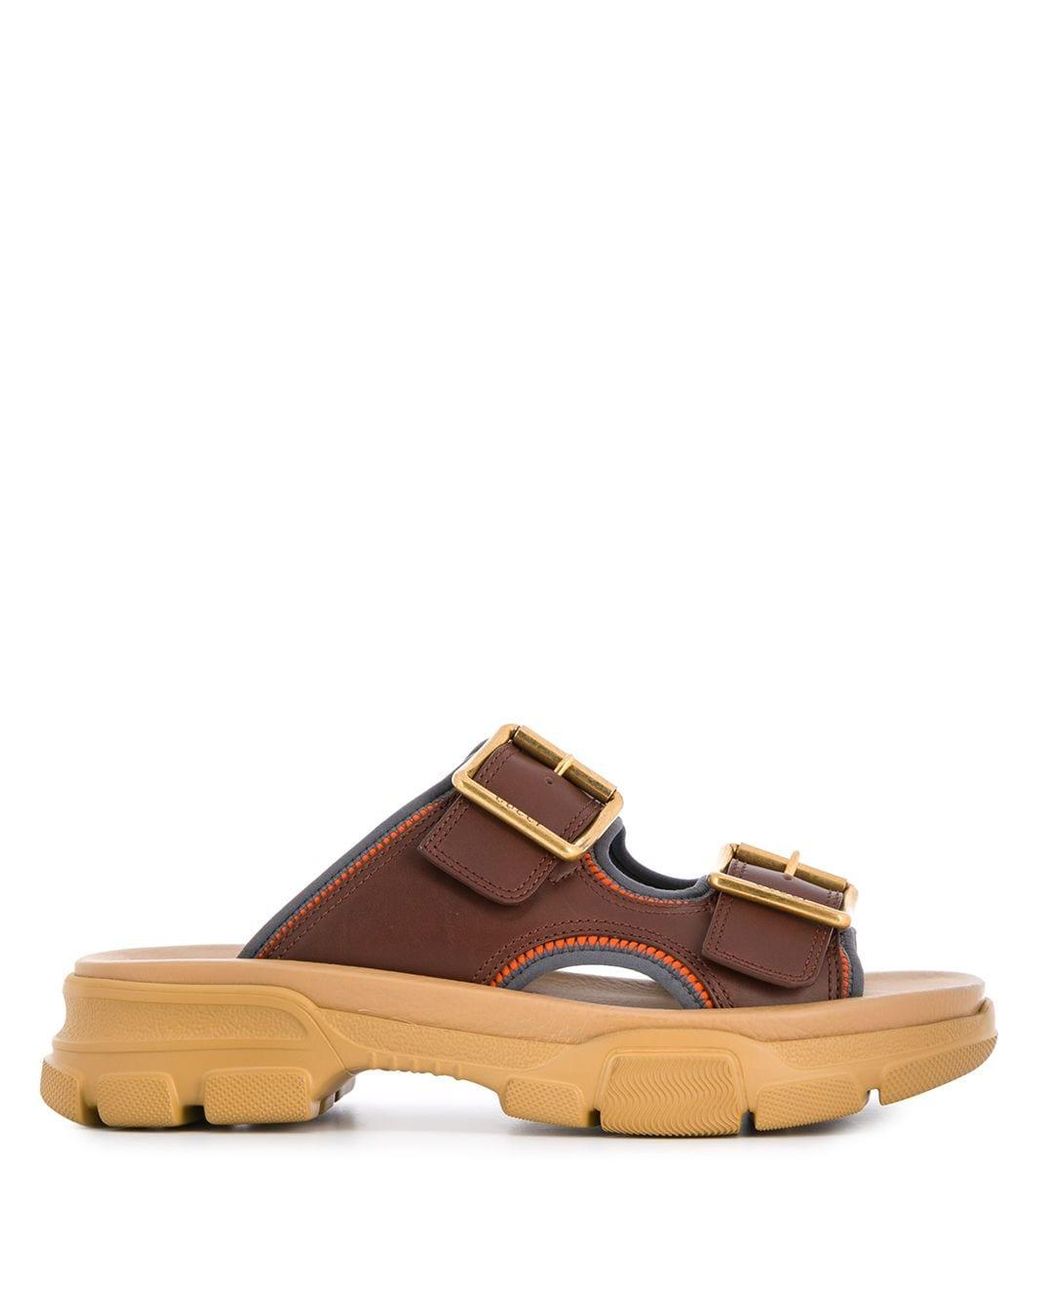 mens chunky sandals